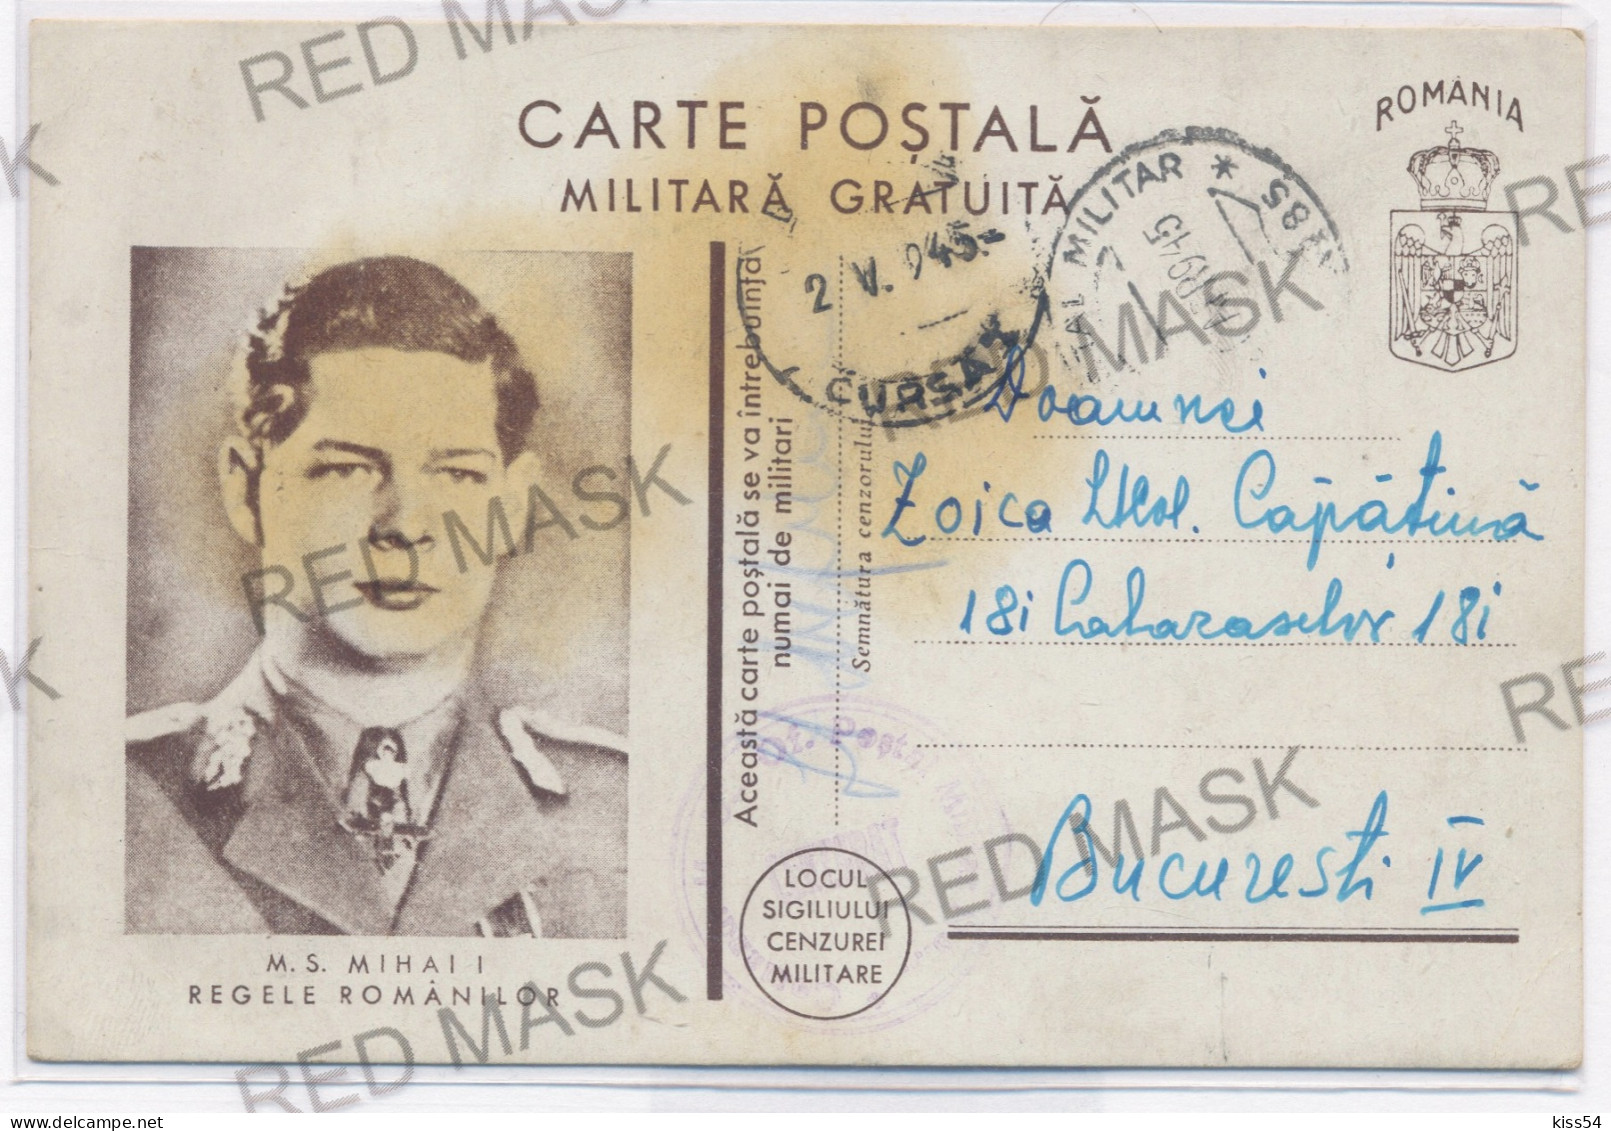 IP 45 - 5x King MICHAEL ( Brown Color, Glossy Cardboard ) - Military Stationery - Used - 1945 - Ganzsachen